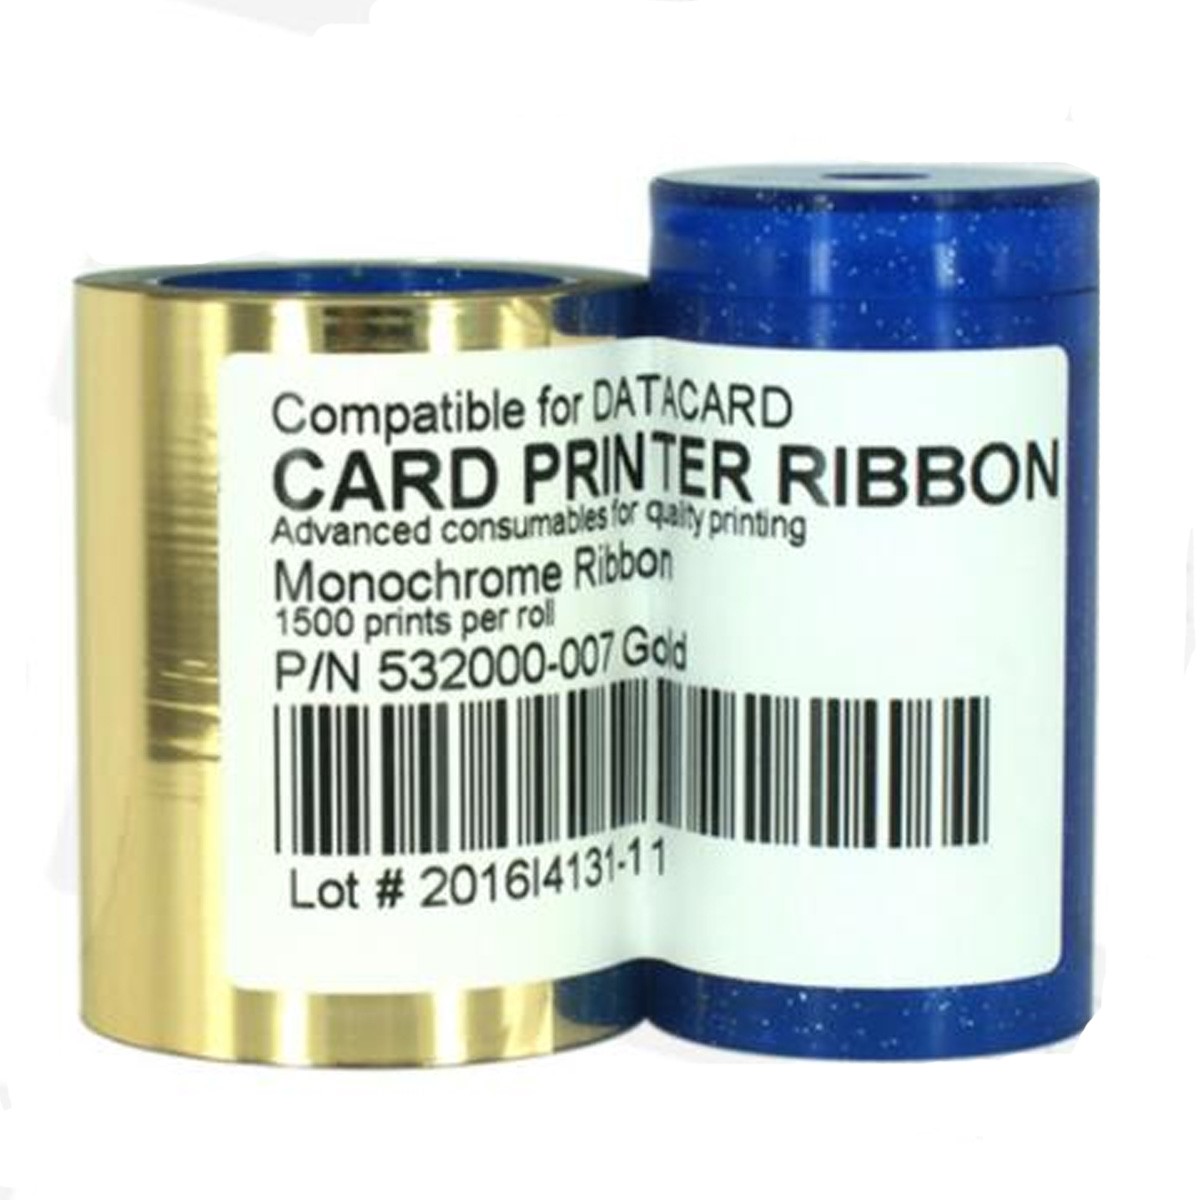 New color ribbon for Datacard 532000-007 Gold 1500 sheet